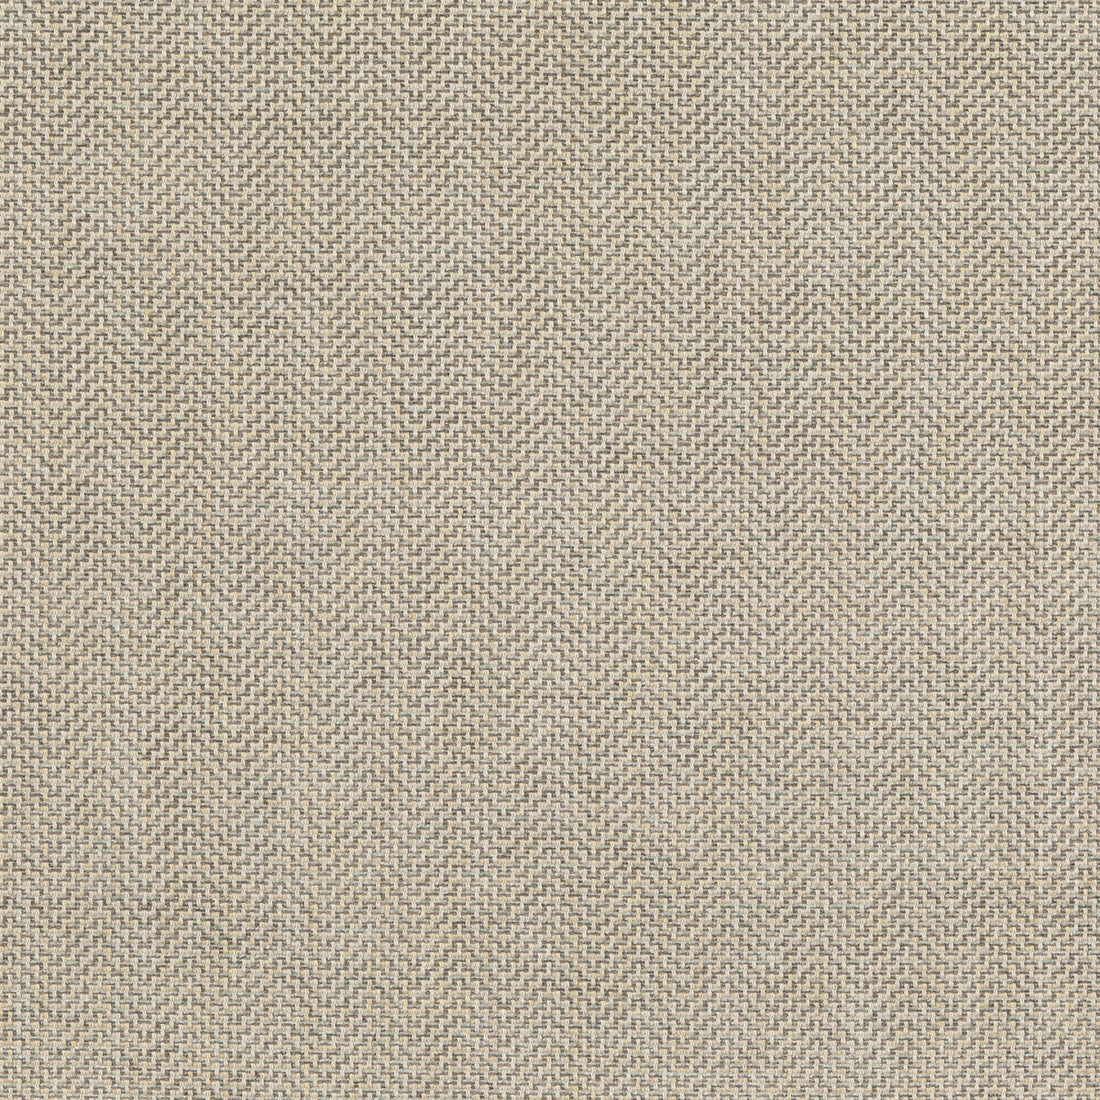 Glanville fabric in dove color - pattern BF10873.910.0 - by G P &amp; J Baker in the Essential Colours II collection